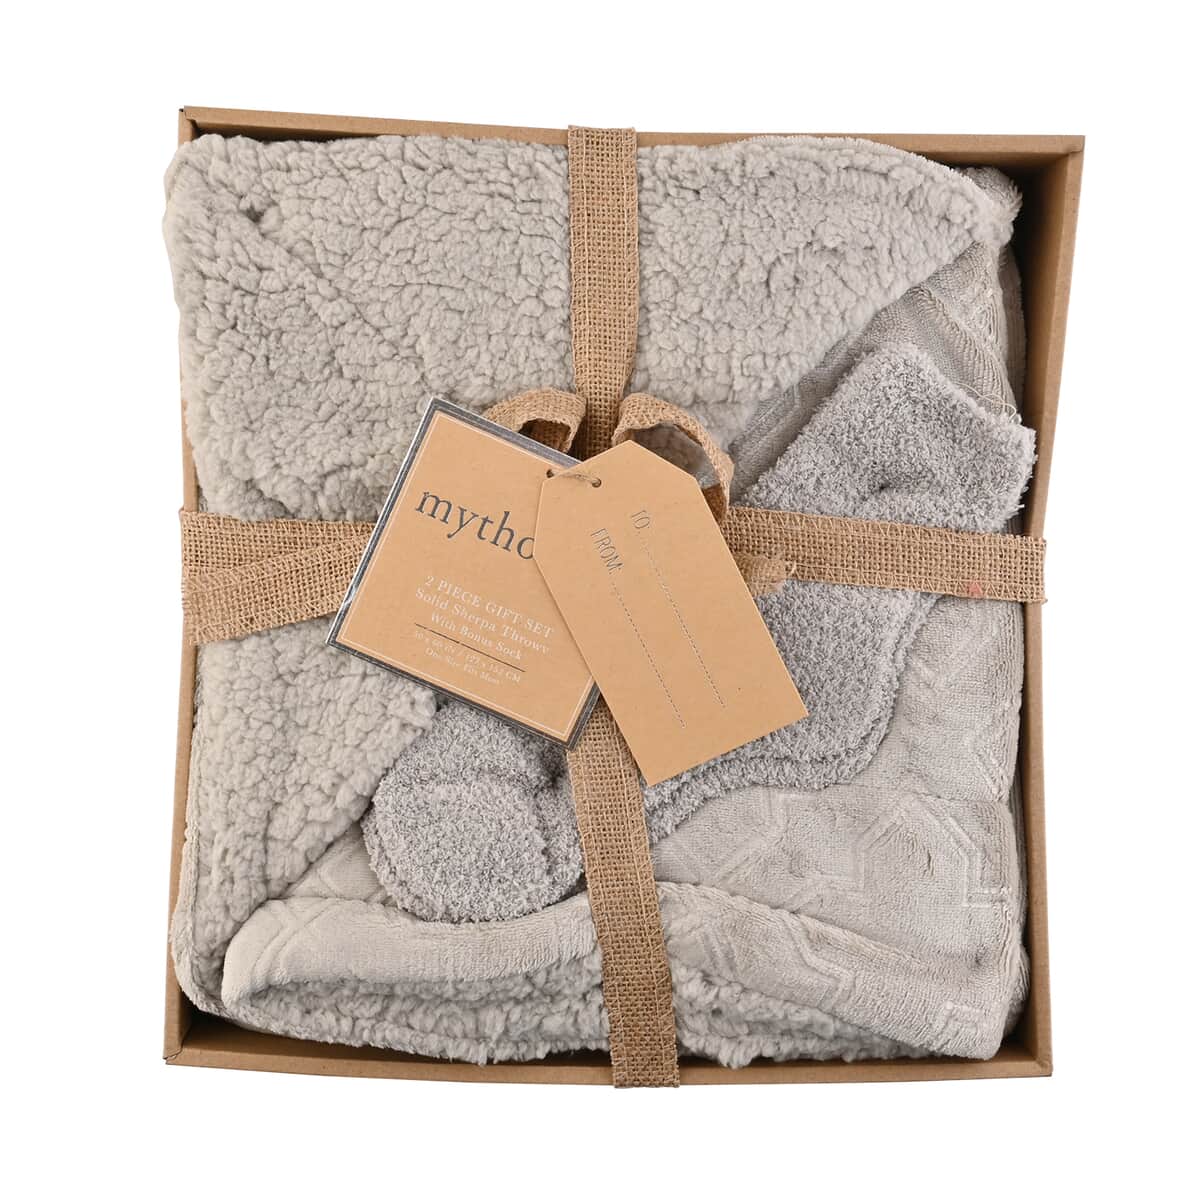 ARDOUR 2pc Gift Set Beige Sherpa Throw with Bonus Socks Set (One Size Fits Most) image number 3